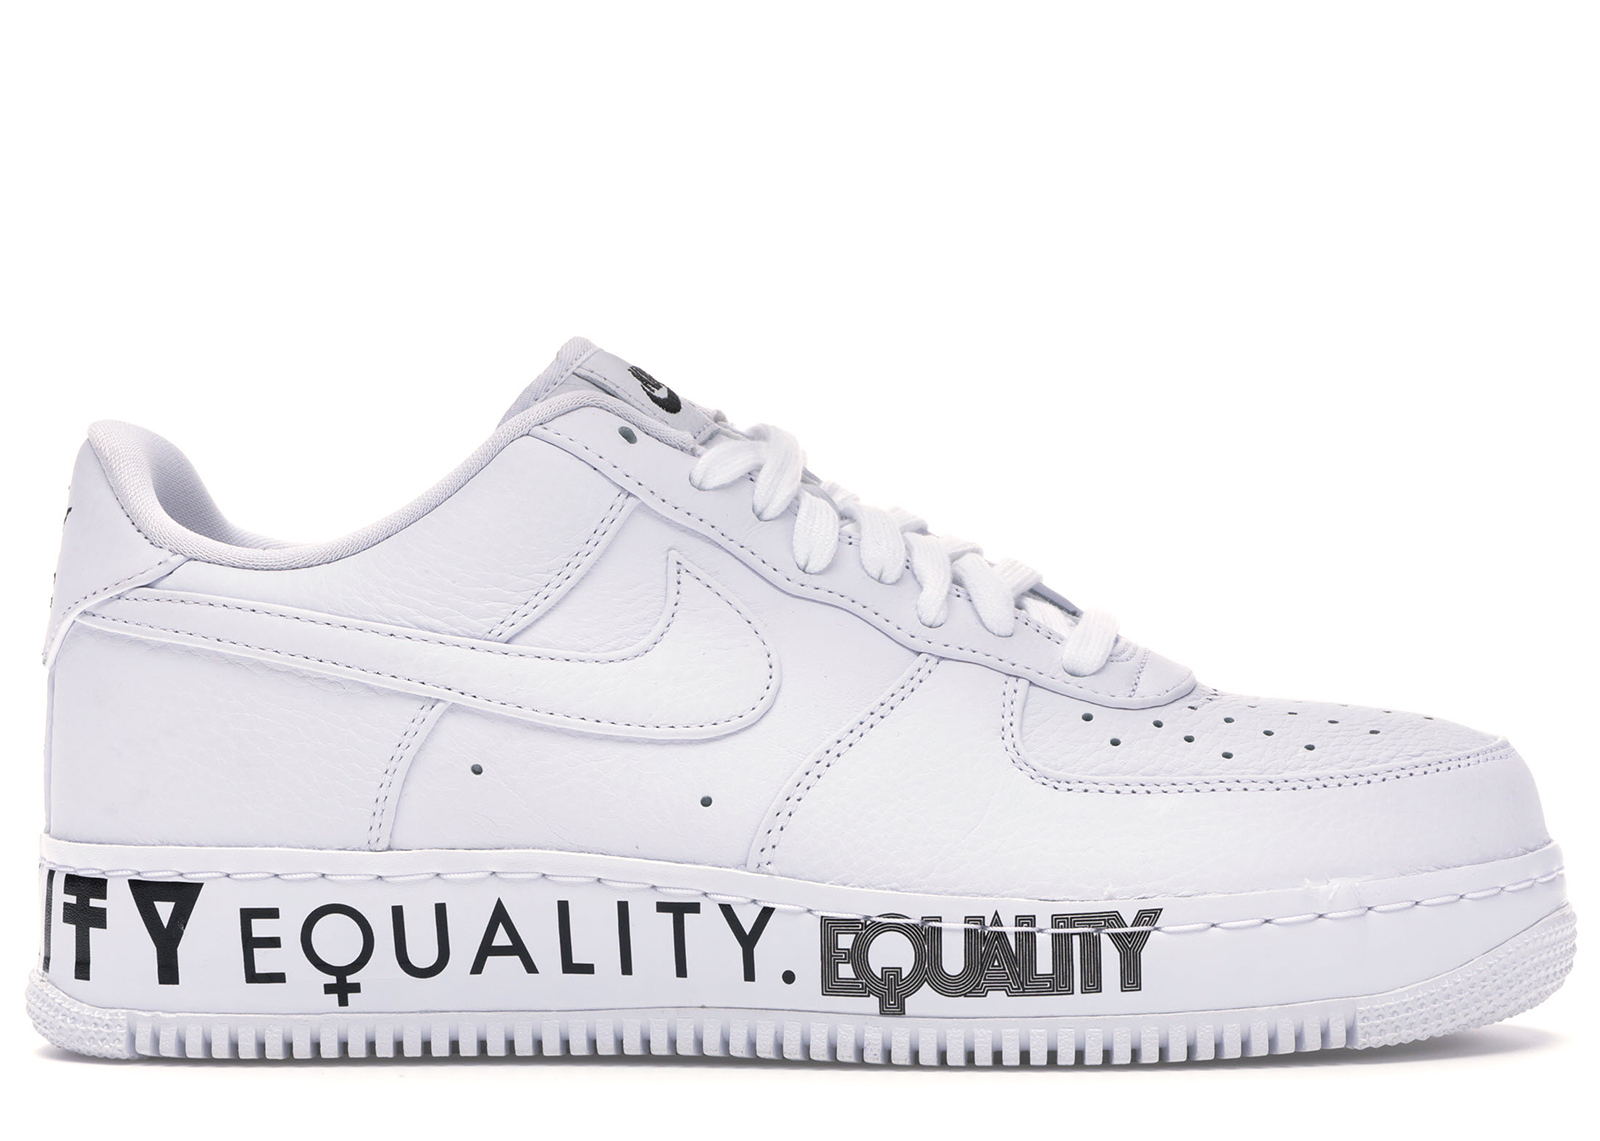 Nike Air Force 1 Low Equality - AQ2118-100